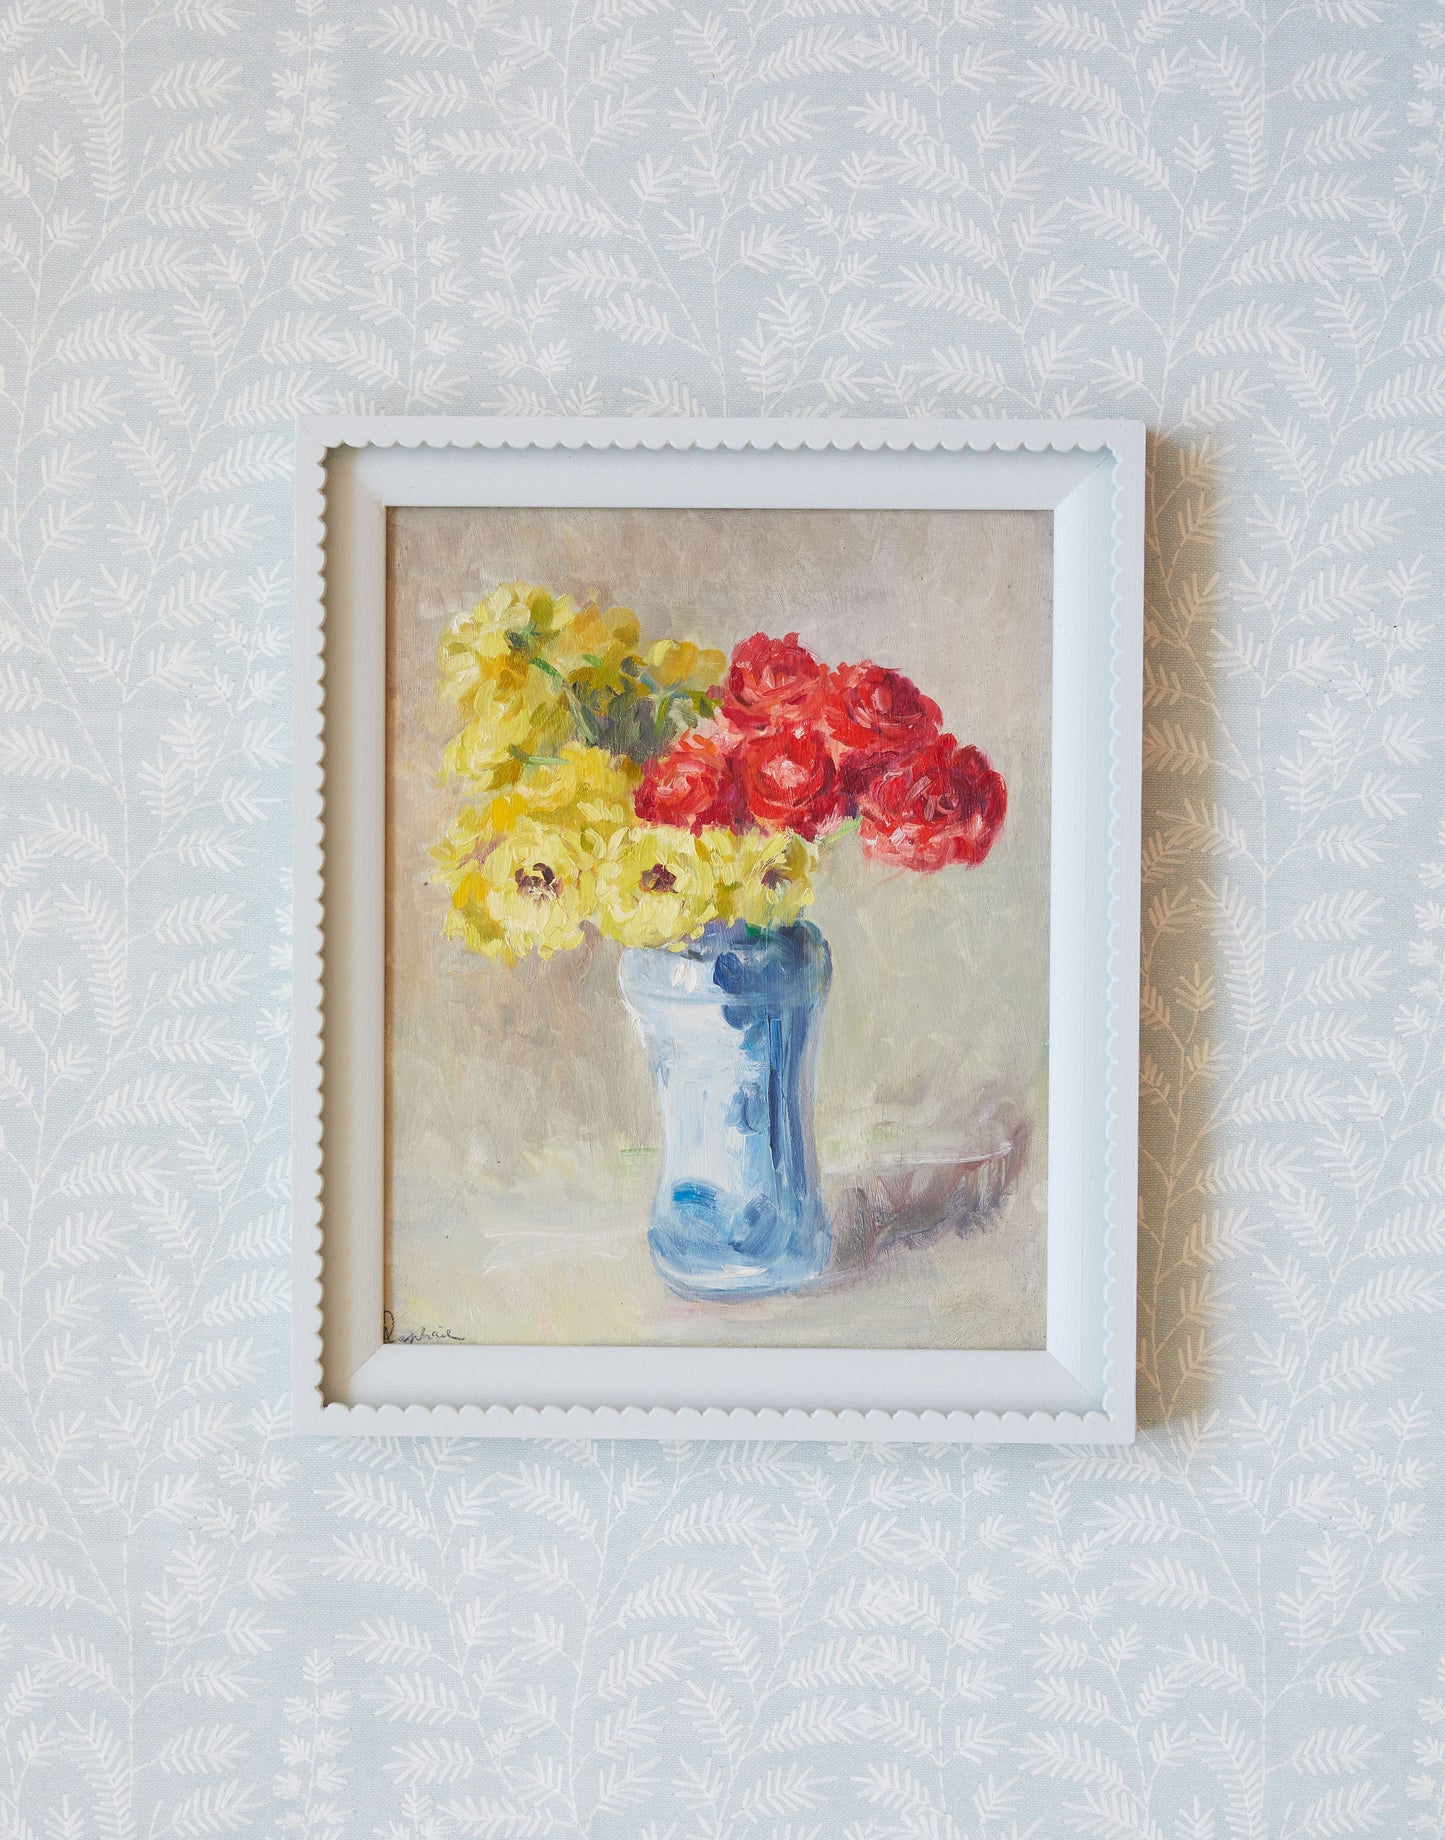 A 20th Century Oil Painting of Flowers in a Blue Vase